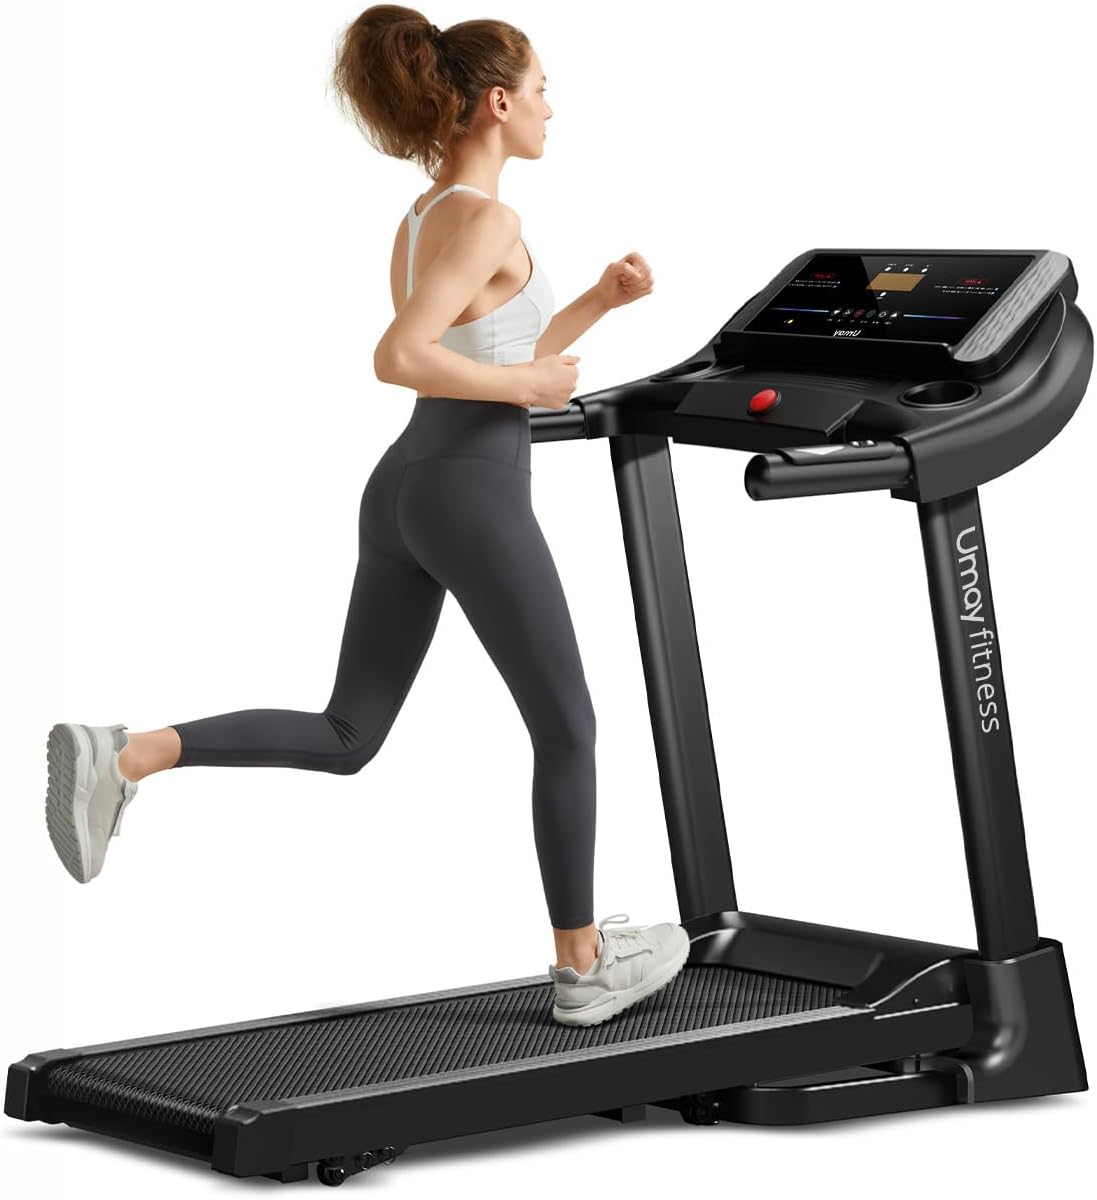 UMAY Fitness Home Folding 3 Level Incline Treadmill with Pulse Sensors, 3.0 HP Quiet Brushless, 8.7 MPH, 300 LBS Capacity